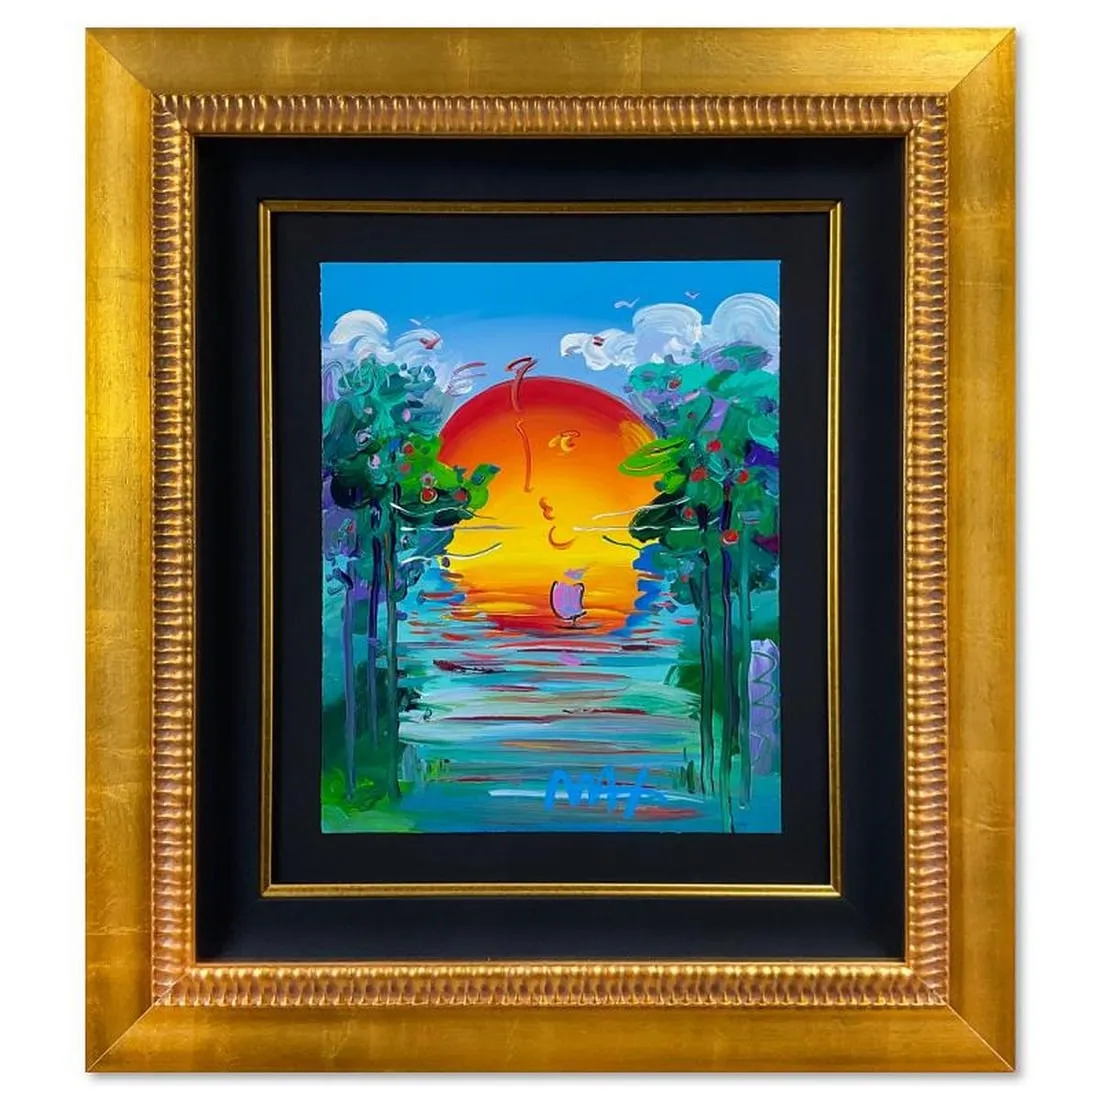 Peter Max, "A Better World" Framed Original Acrylic Painting, Hand Signed with Registration Number